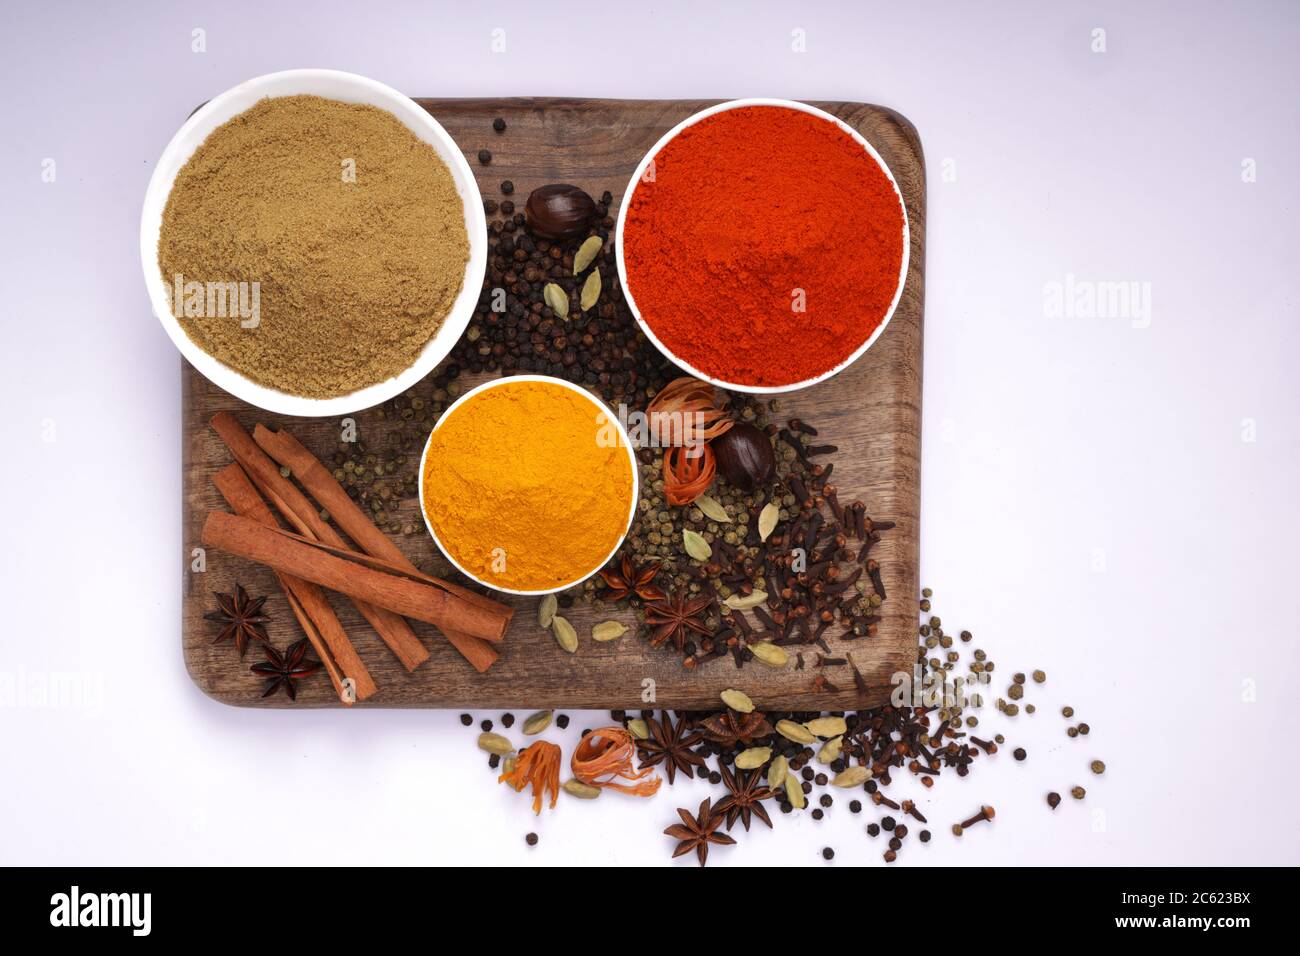 Top view of Dried Spices Black pepper,Green pepper,Mace or Javiithri flower,Nutmeg,Clove,Cinnamon,Cardamom,Star Anise ,red chilli,turmeric powder etc Stock Photo